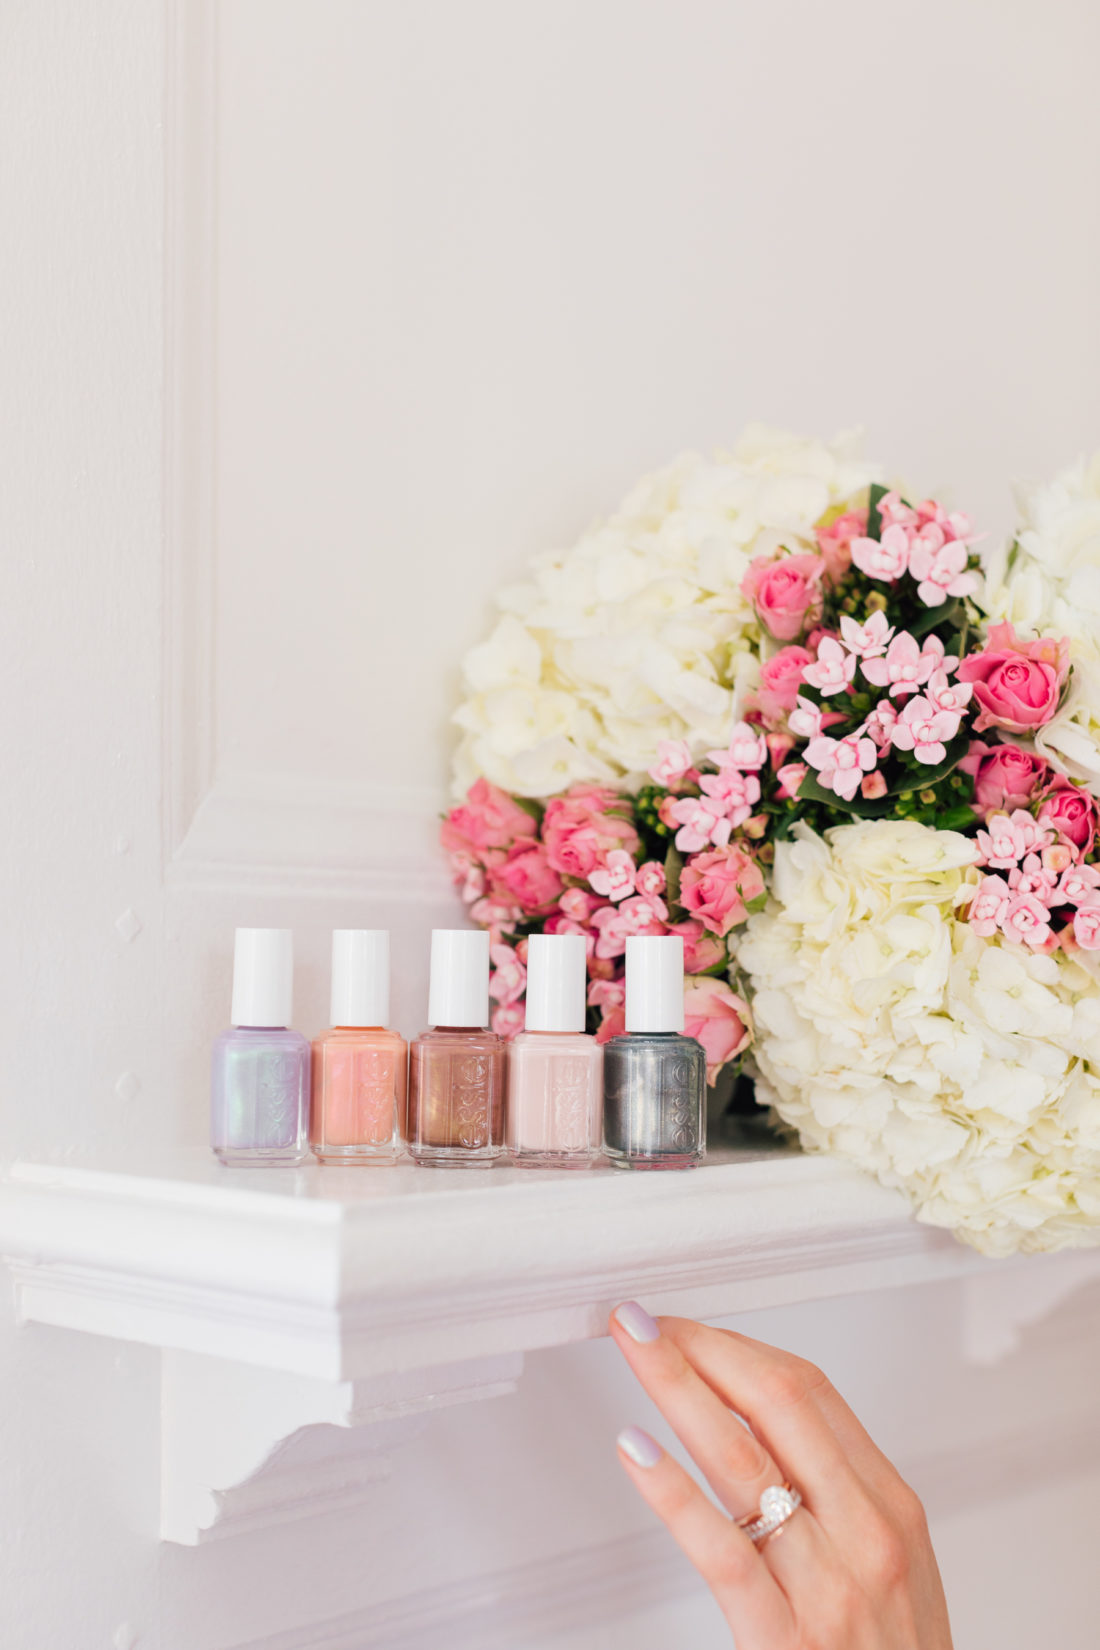 Eva Amurri Martino shares her favorite Essie nail polish colors from their Spring 2019 collection